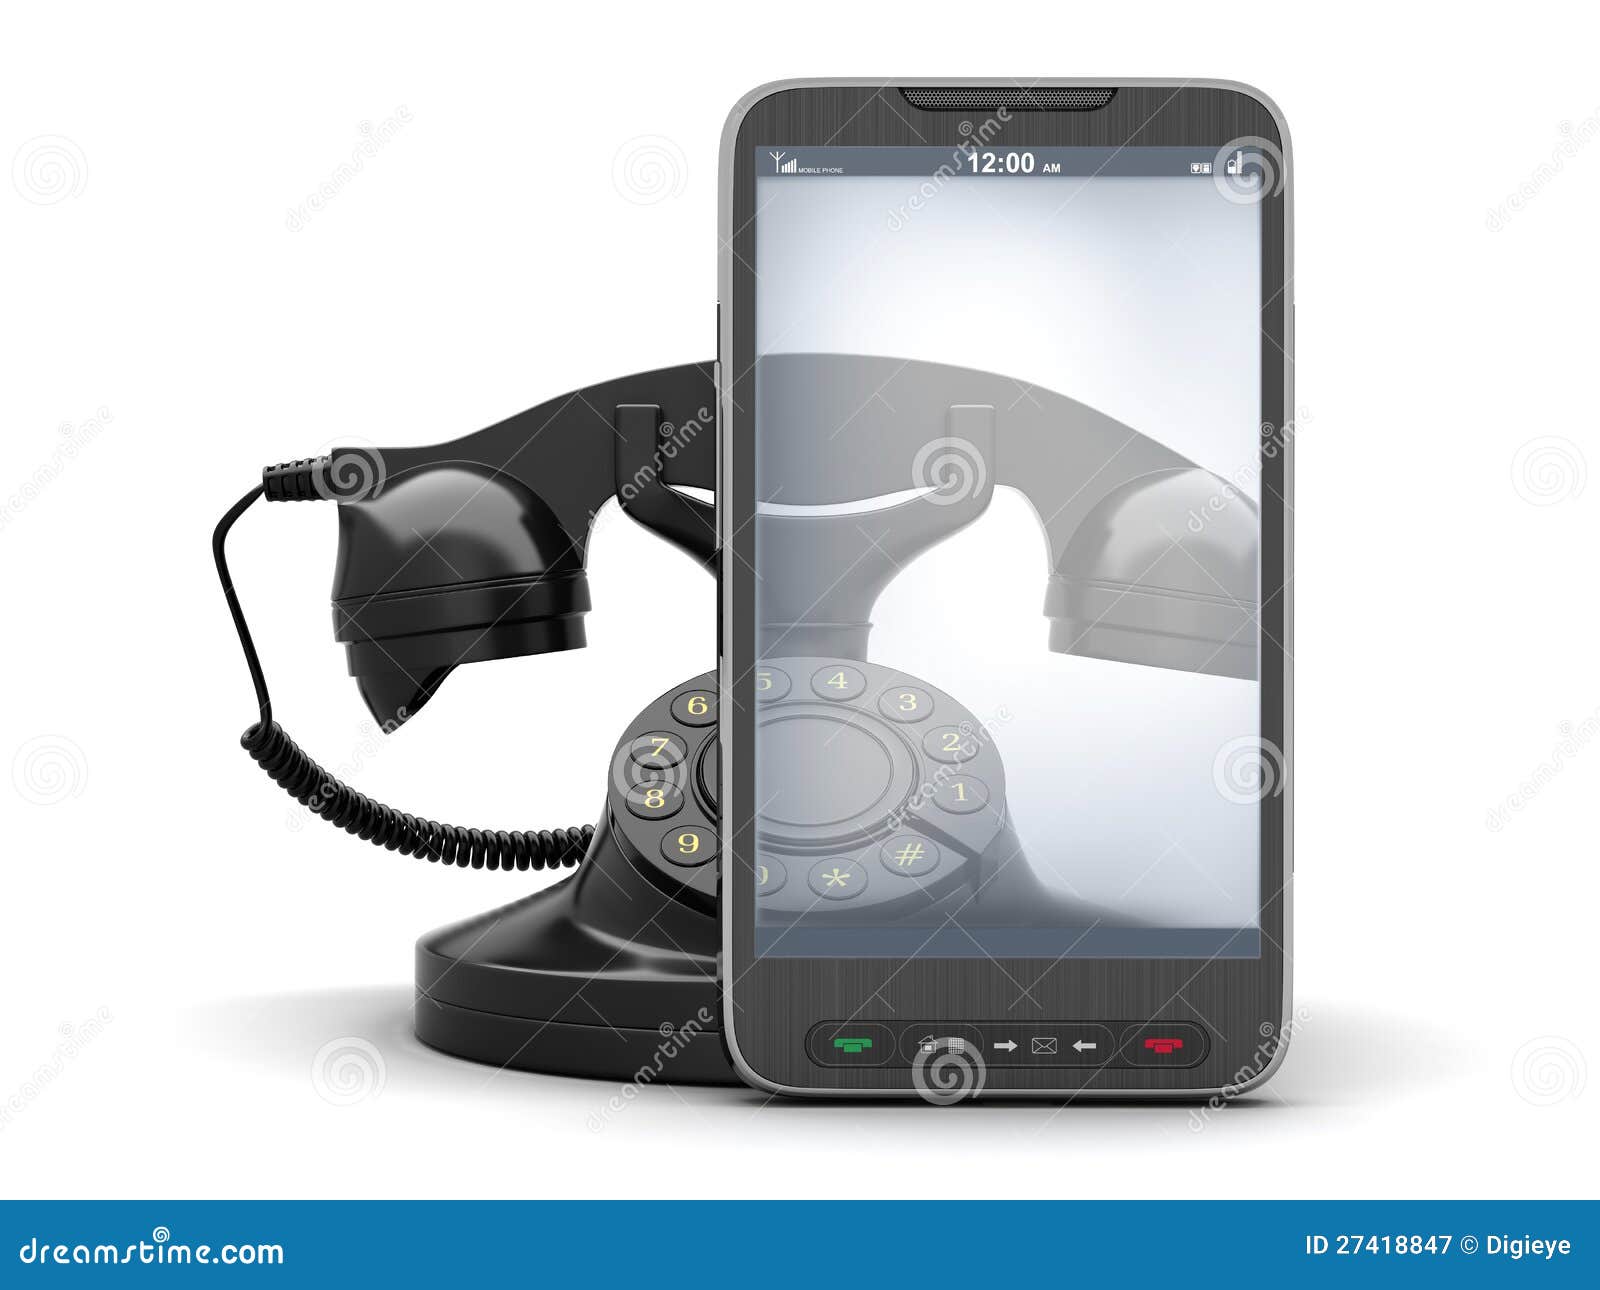 old rotary telephone and modern cell phone